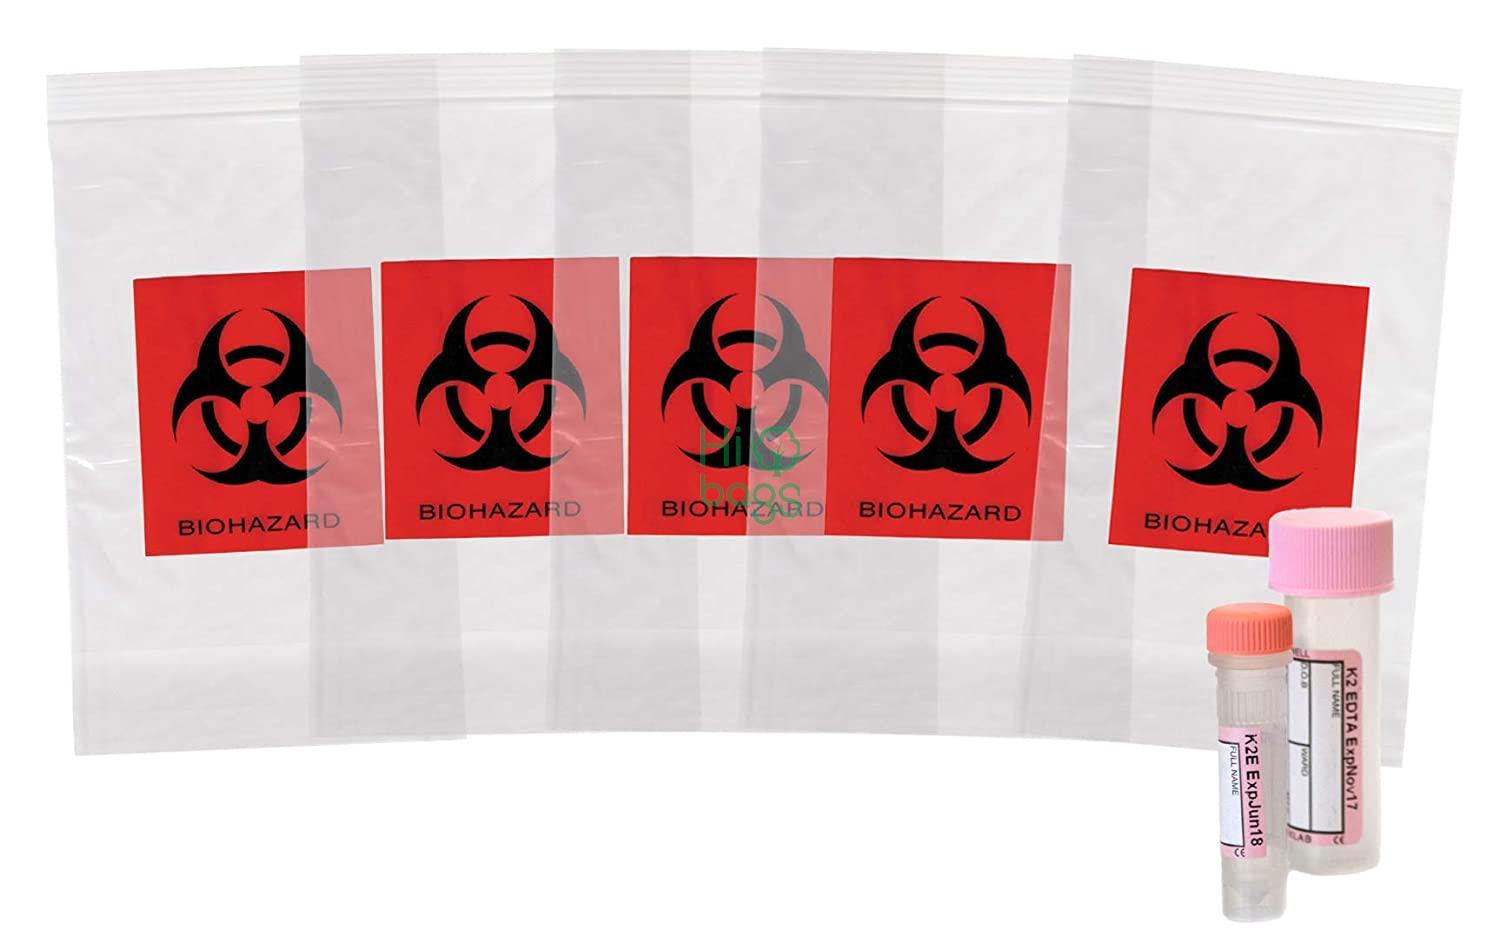 Biohazard Specimen Bags Black and Red  Zip Lock Top Plastic Pouch Bags Printed Polyethylene Transport Bags M